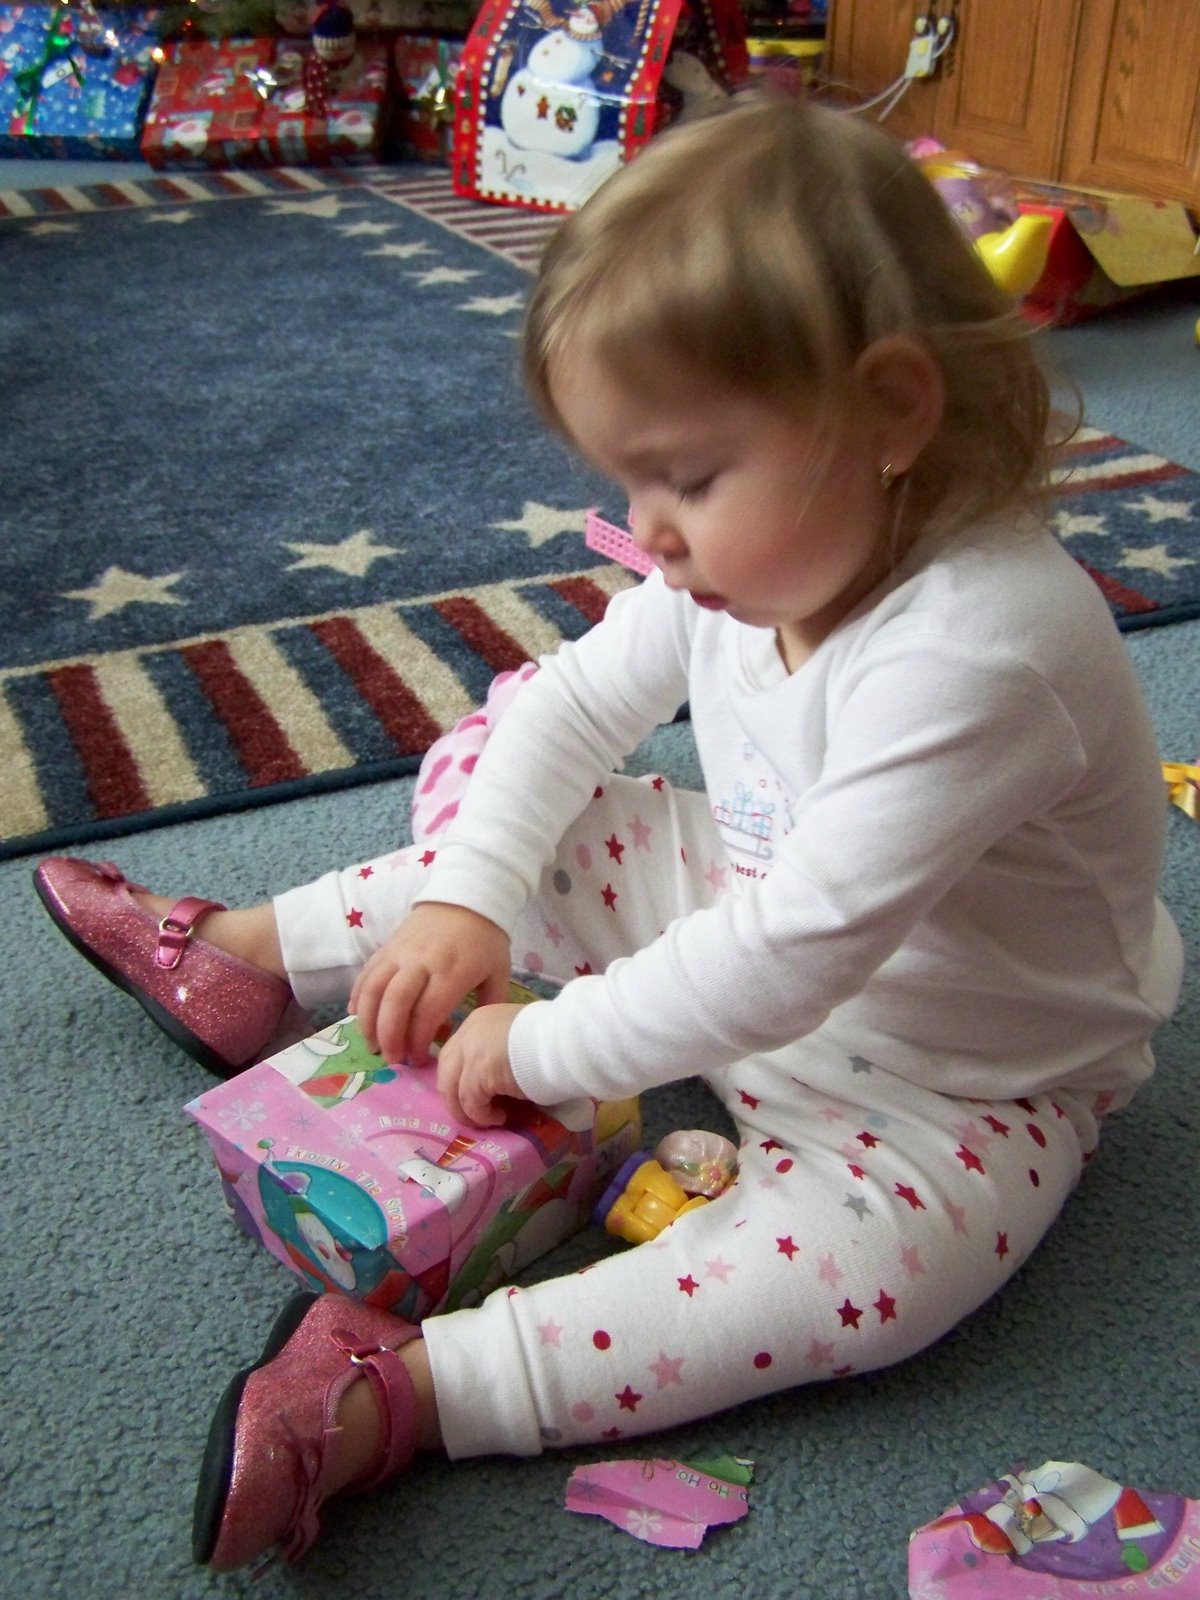 [Lily+opening+present+with+new+shoes.jpg]